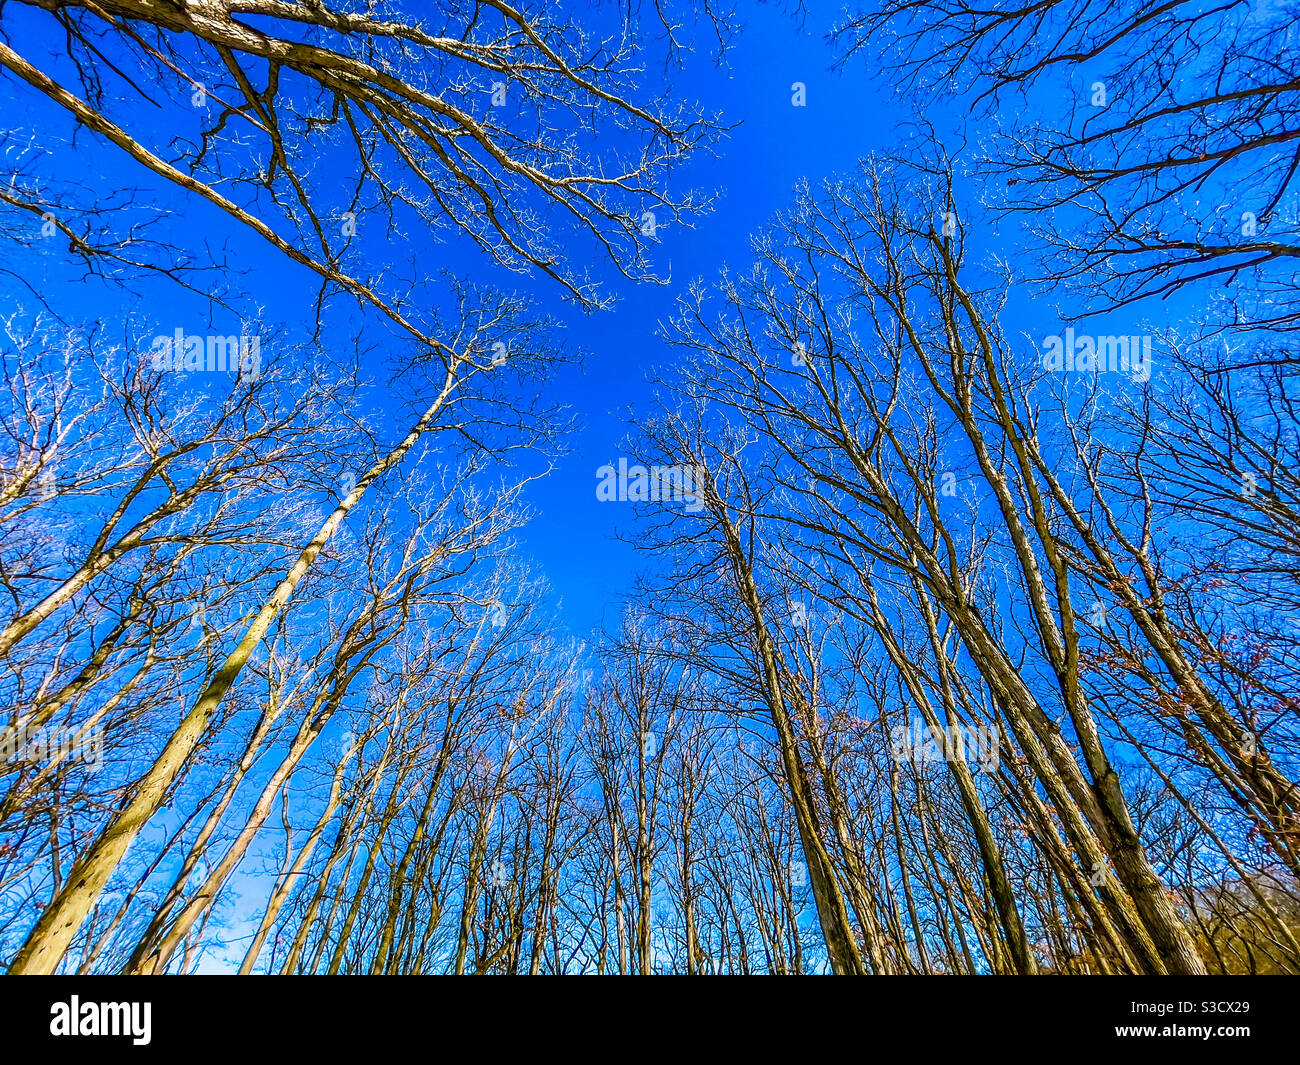 Bare trees and blue sky. Stock Photo